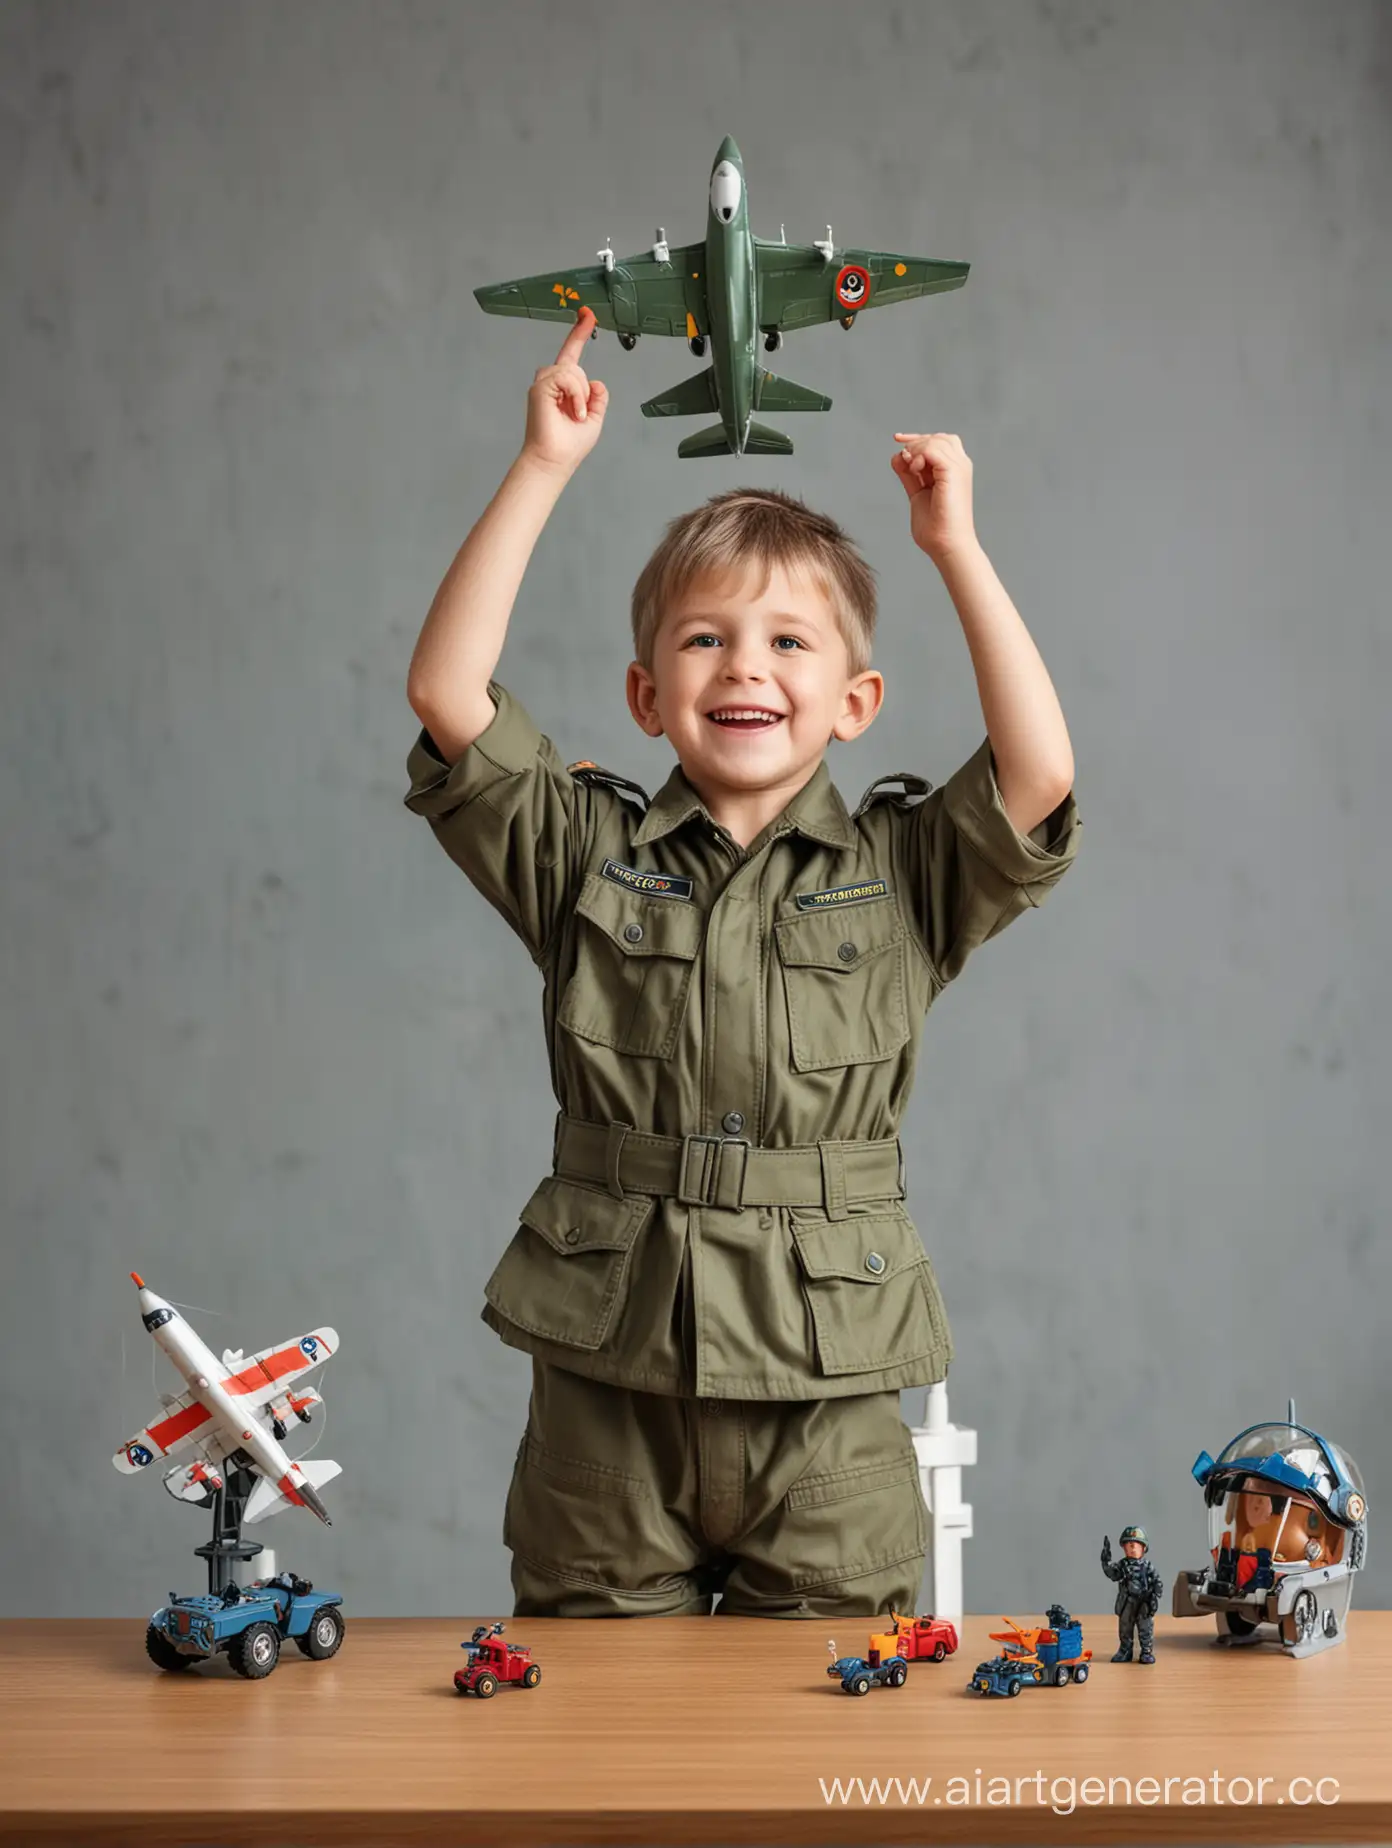 Joyful-Child-in-Military-Outfit-Displaying-Toy-Airplane